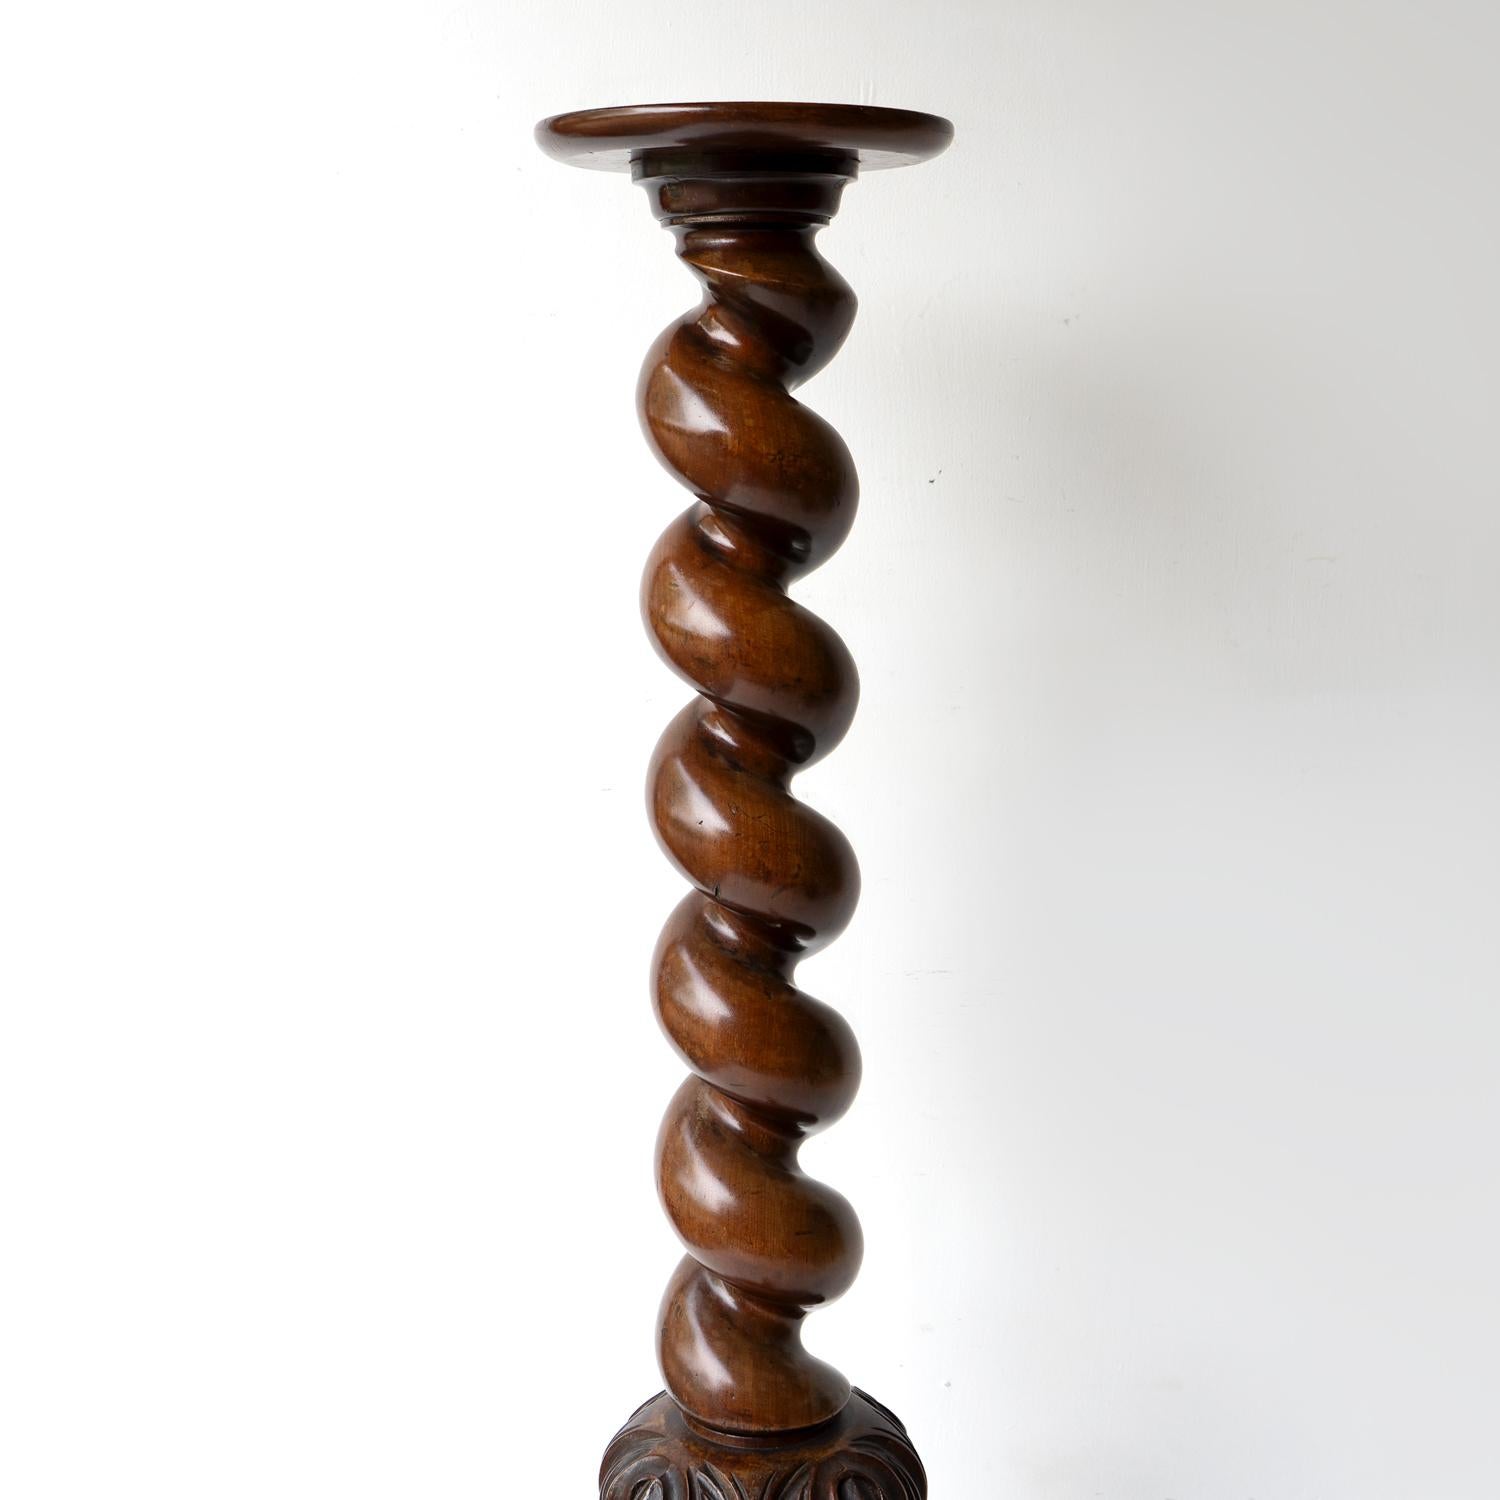 Antique Torchiere

Of unusual proportions with an oversized barely-twist stem over a bulbous carved section terminating with a tripod base with cabriole legs and slipper feet. 

A circular top which could be used to display any number of items,